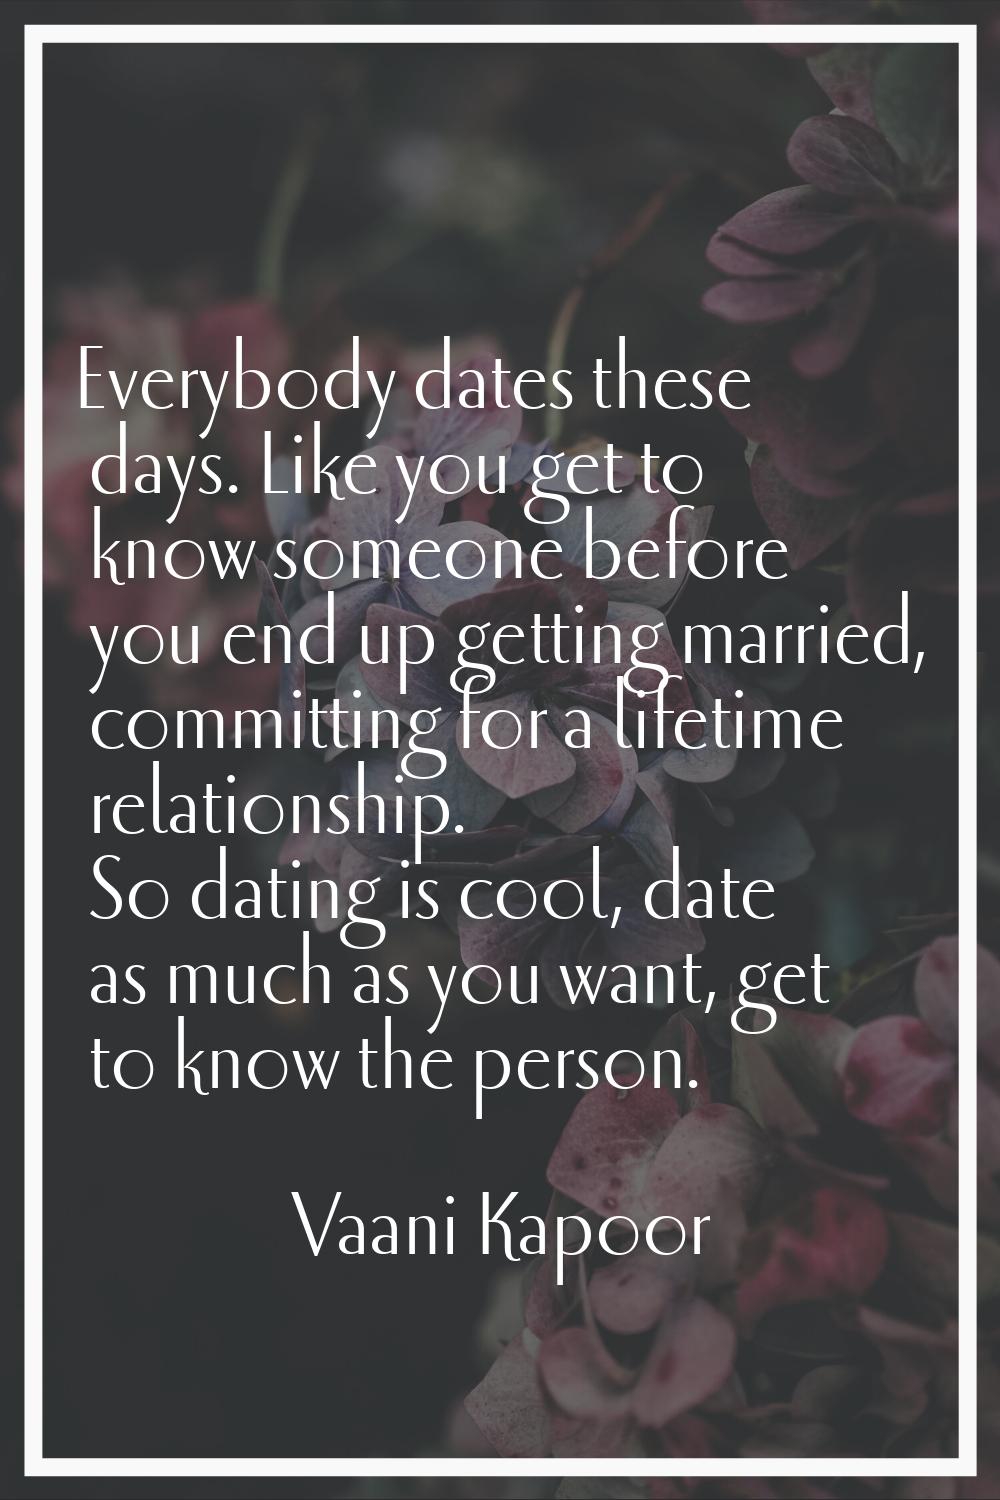 Everybody dates these days. Like you get to know someone before you end up getting married, committ